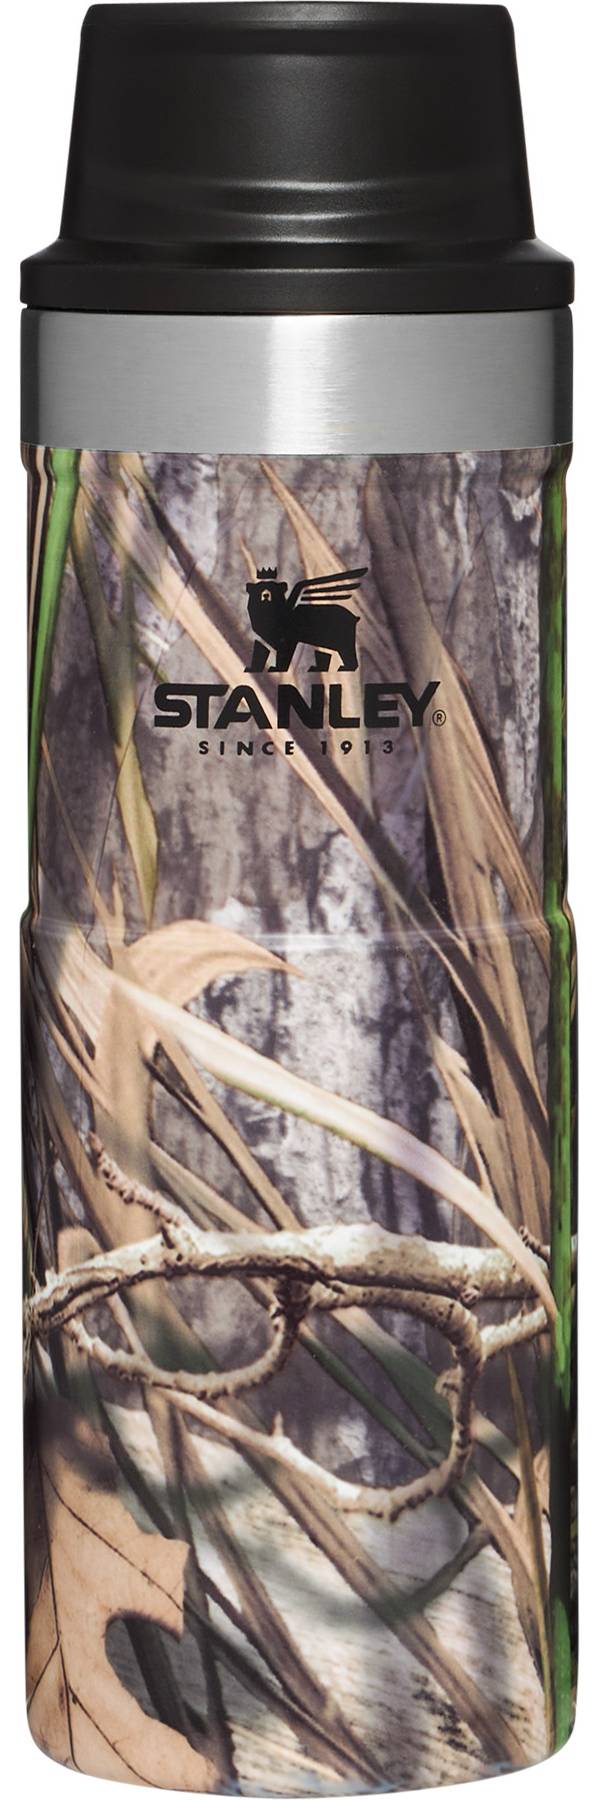 Stanley Classic Trigger-Action Travel Mug product image